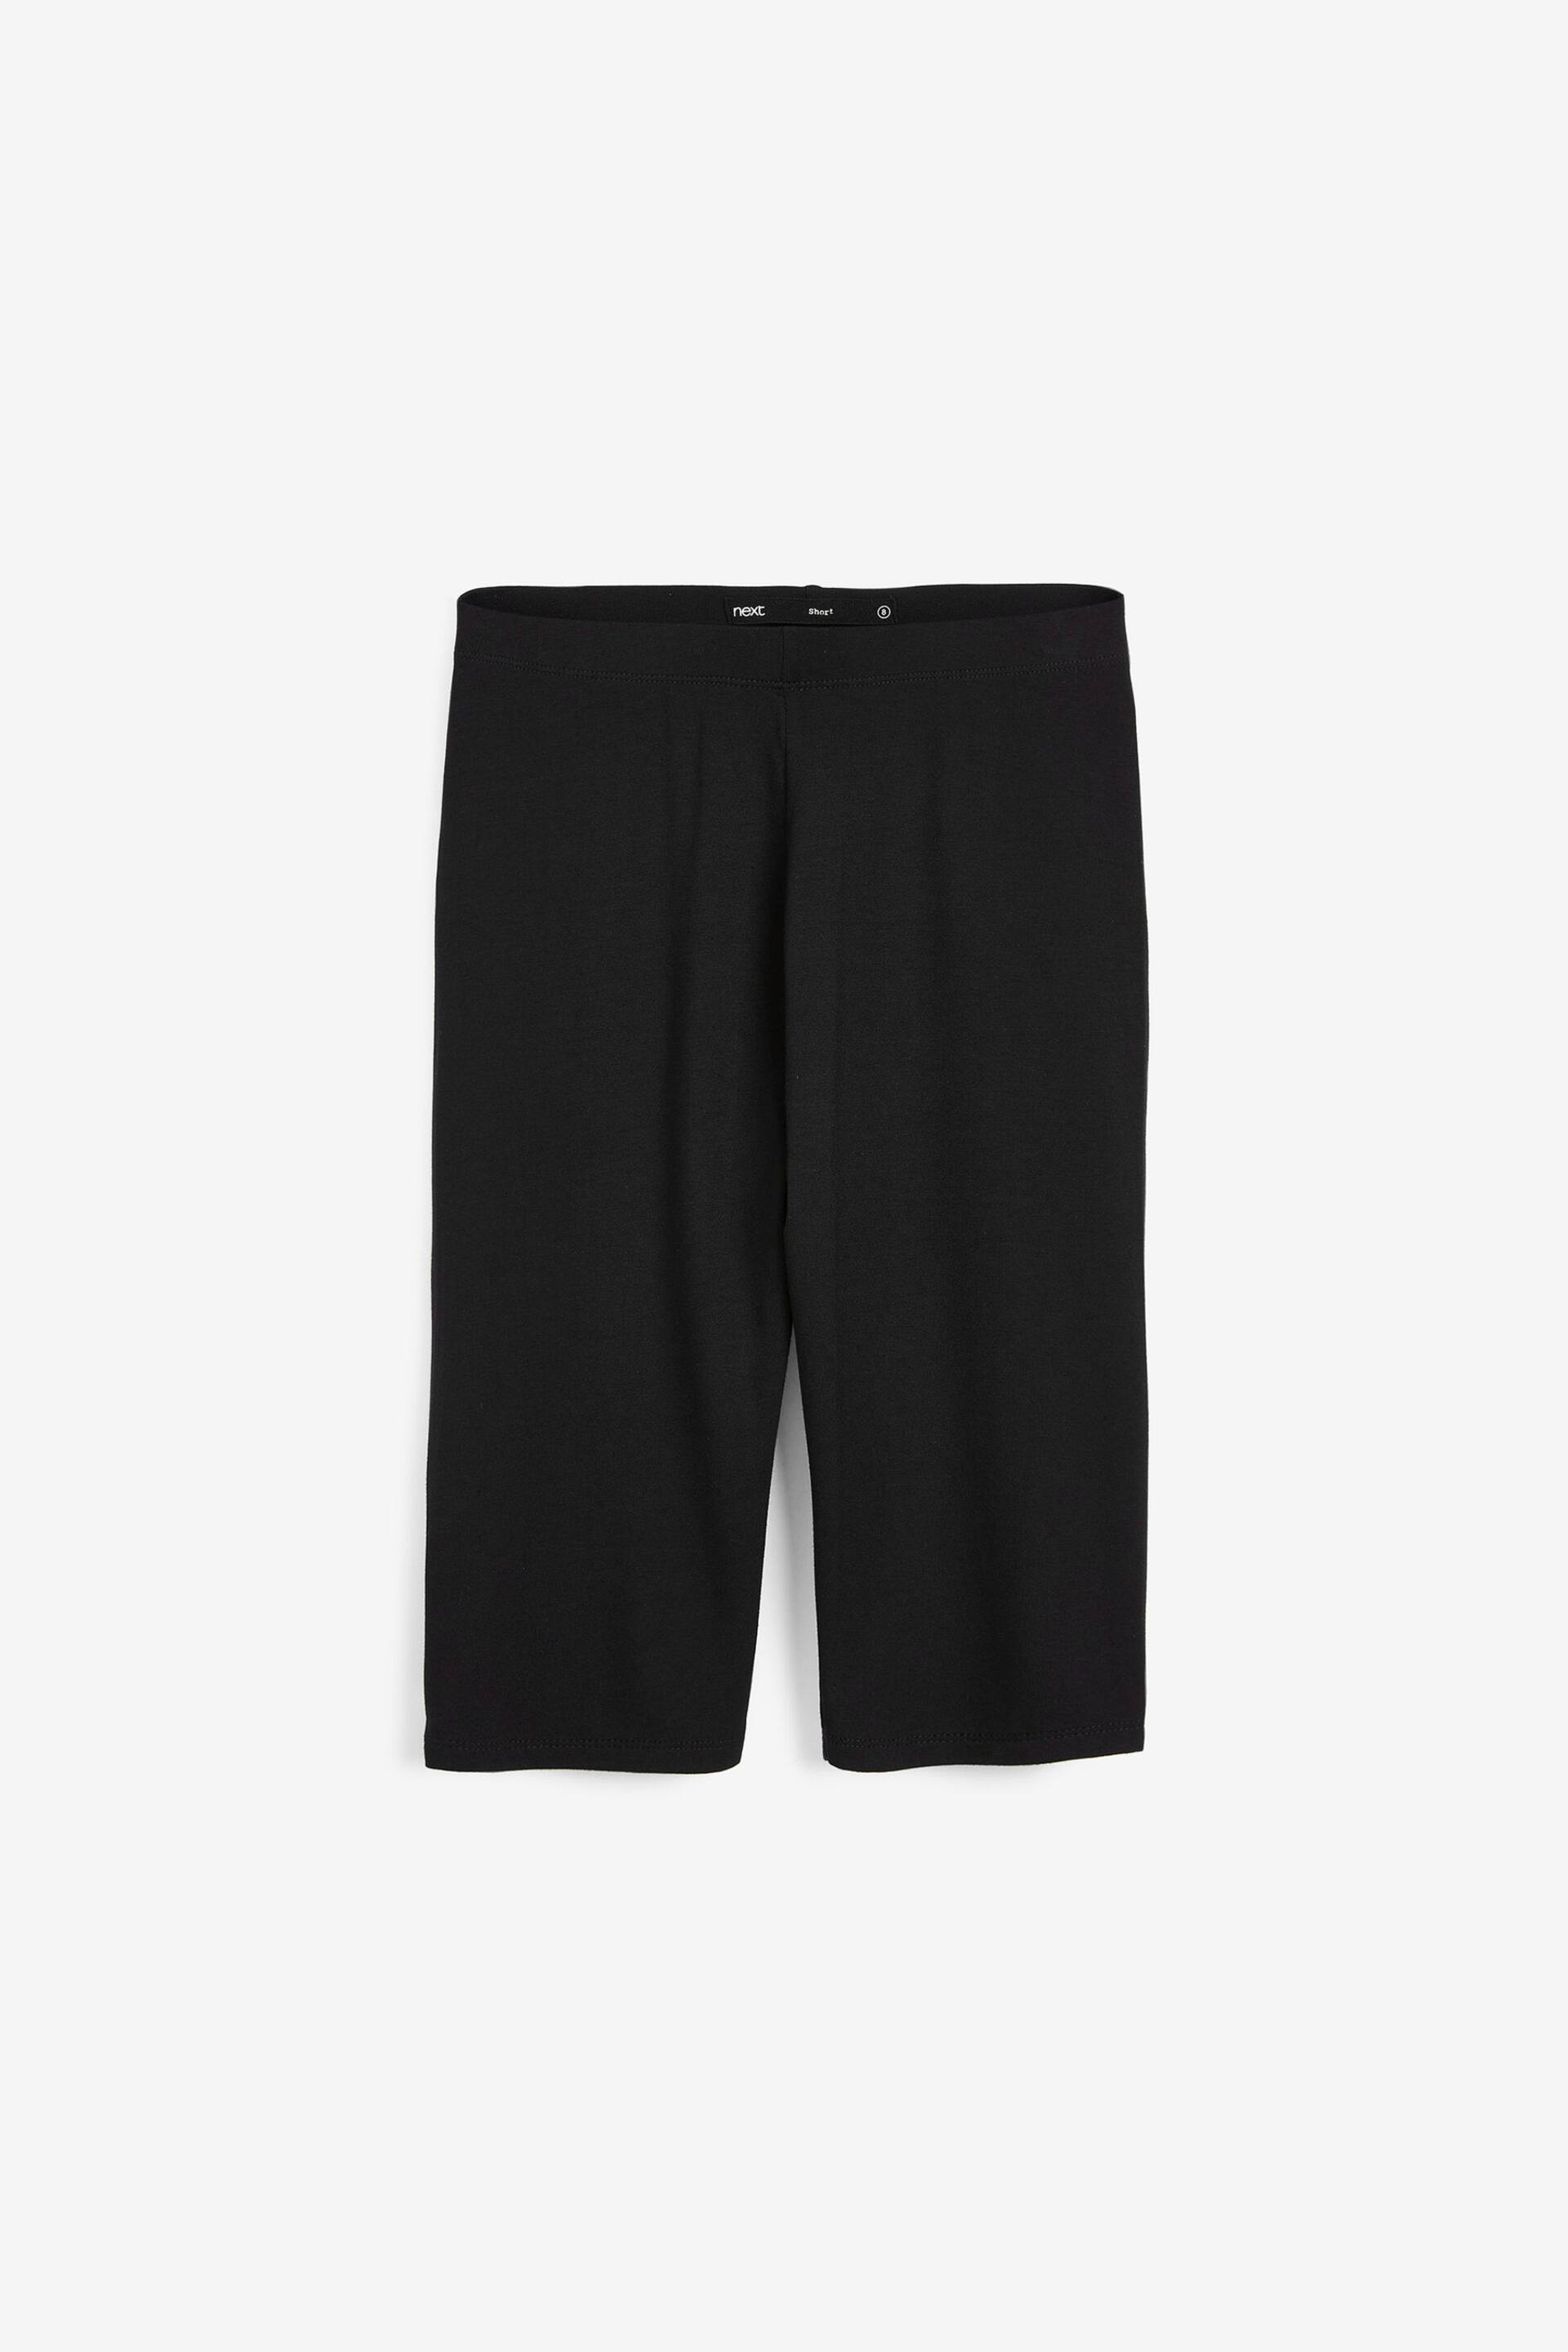 Black Jersey Cycle Shorts - Image 11 of 11